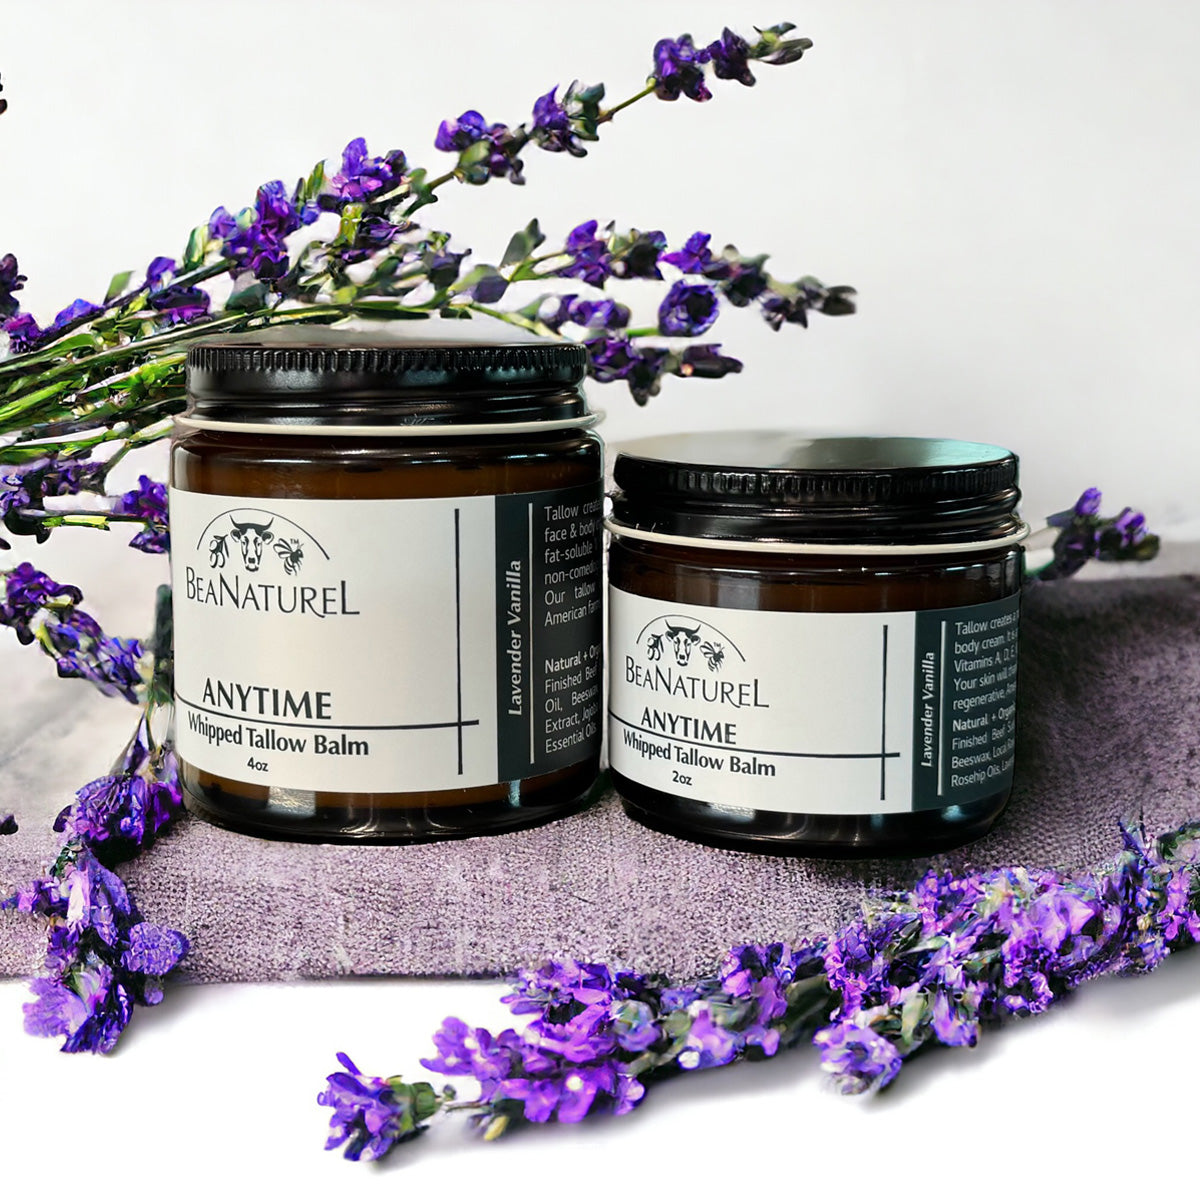 Anytime Whipped Tallow Balm: Lavender Vanilla